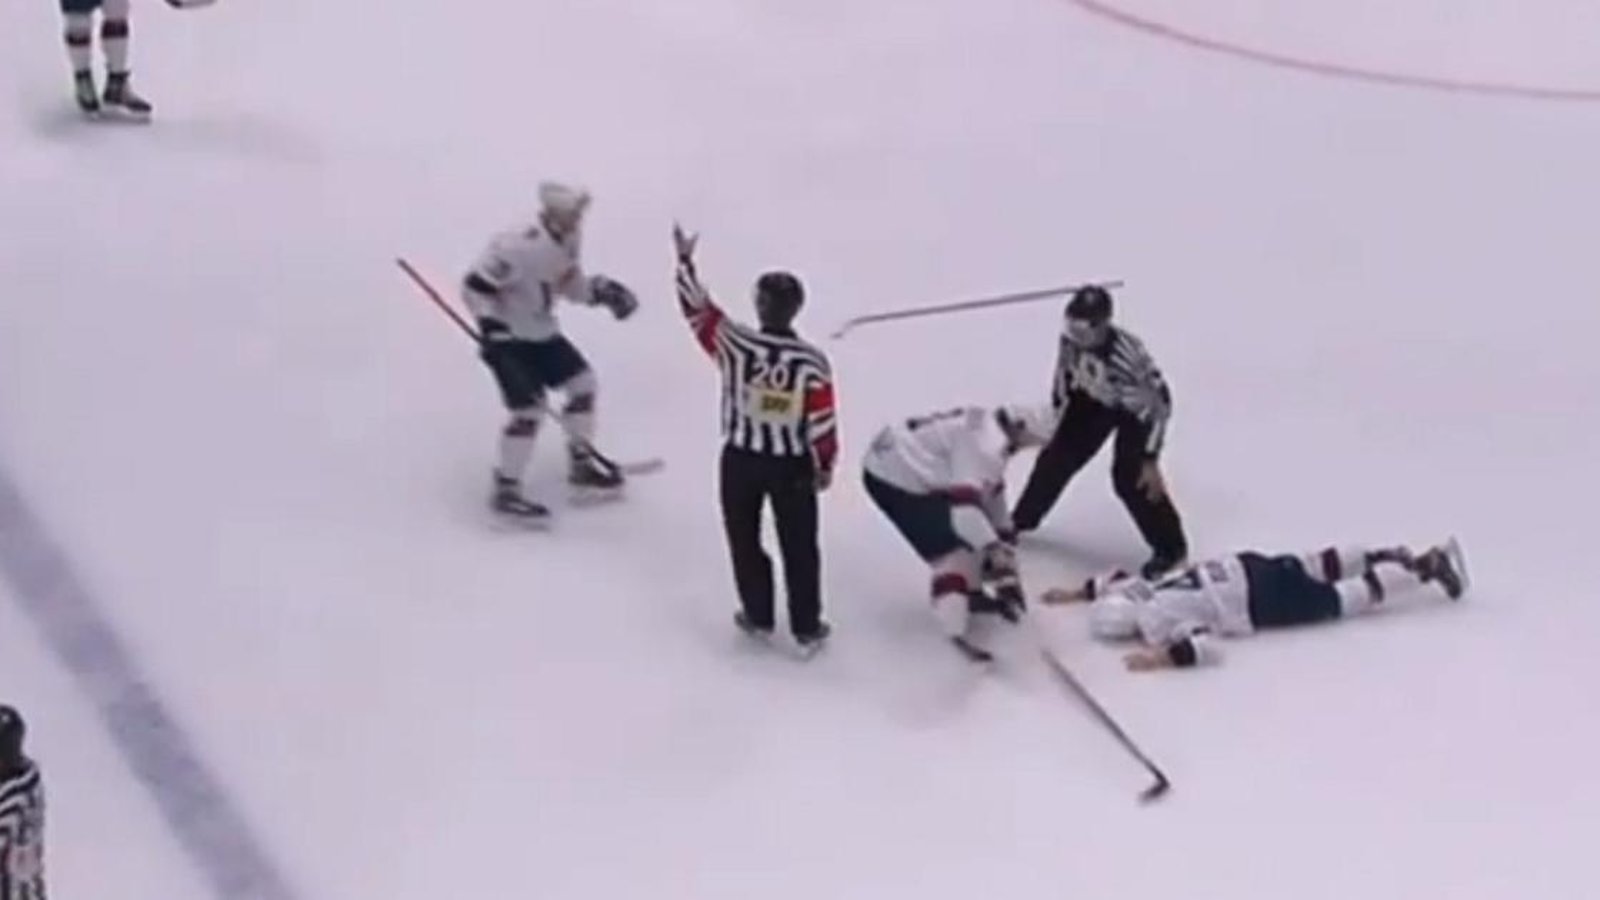 Mark Louis puts Patrik Maier on ice with a one-shot KO.